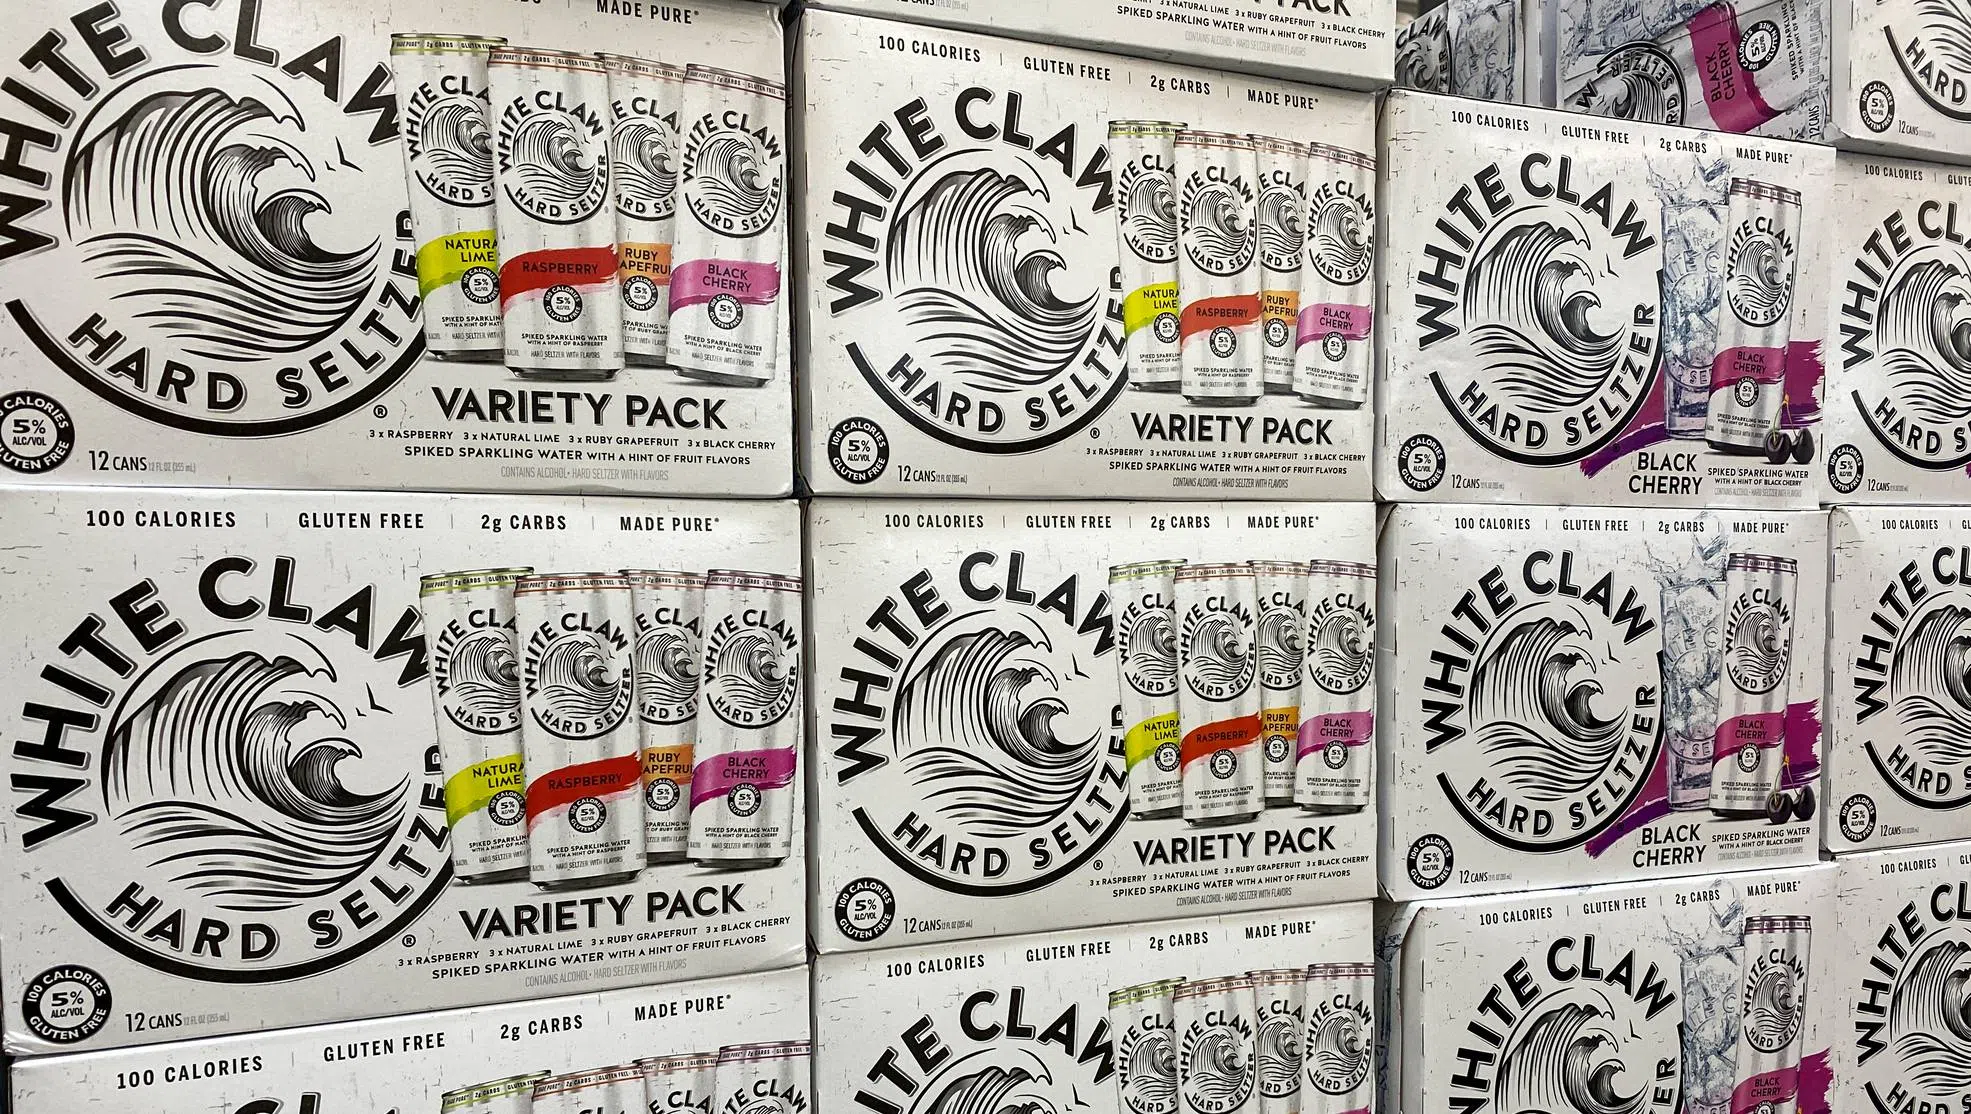 New flavours of White Claws are coming...and Alberta gets them first